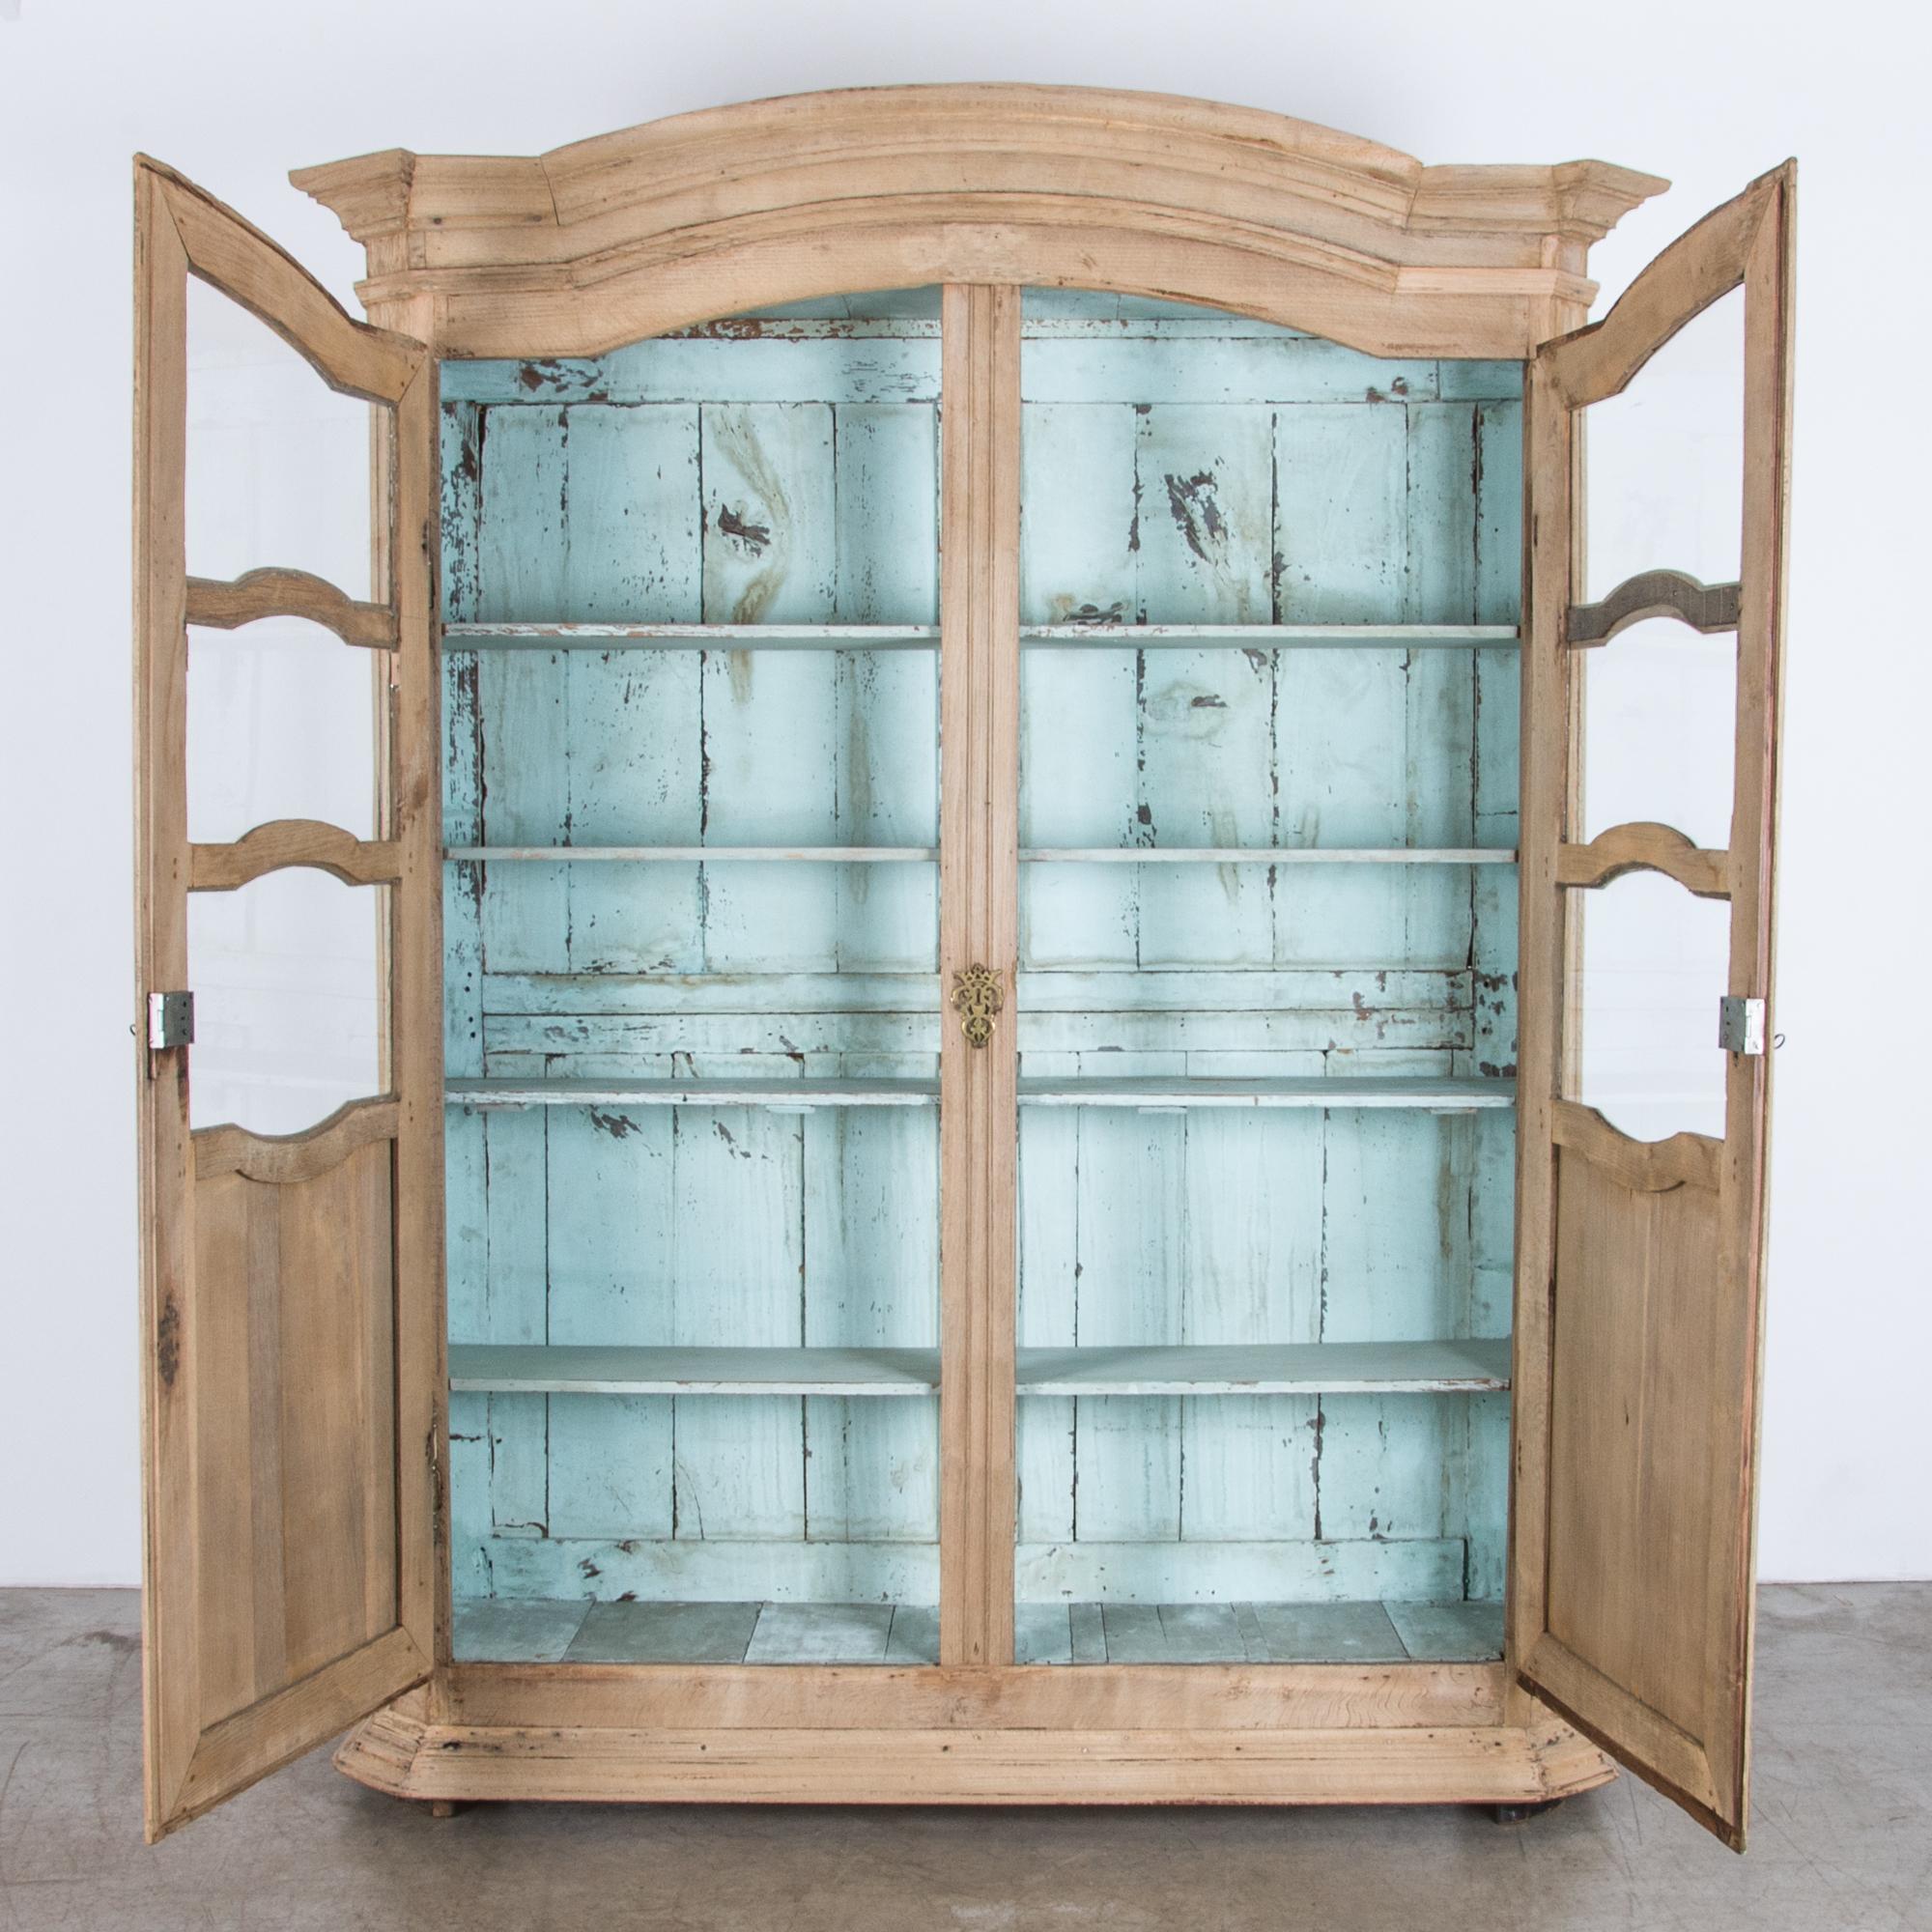 An artefact of the French countryside, in warm and light textured oak with a dramatic bright interior. Five spacious shelves give plenty of storage space, with the upper three levels revealed for display by ornate curved glass panes. Frame and panel